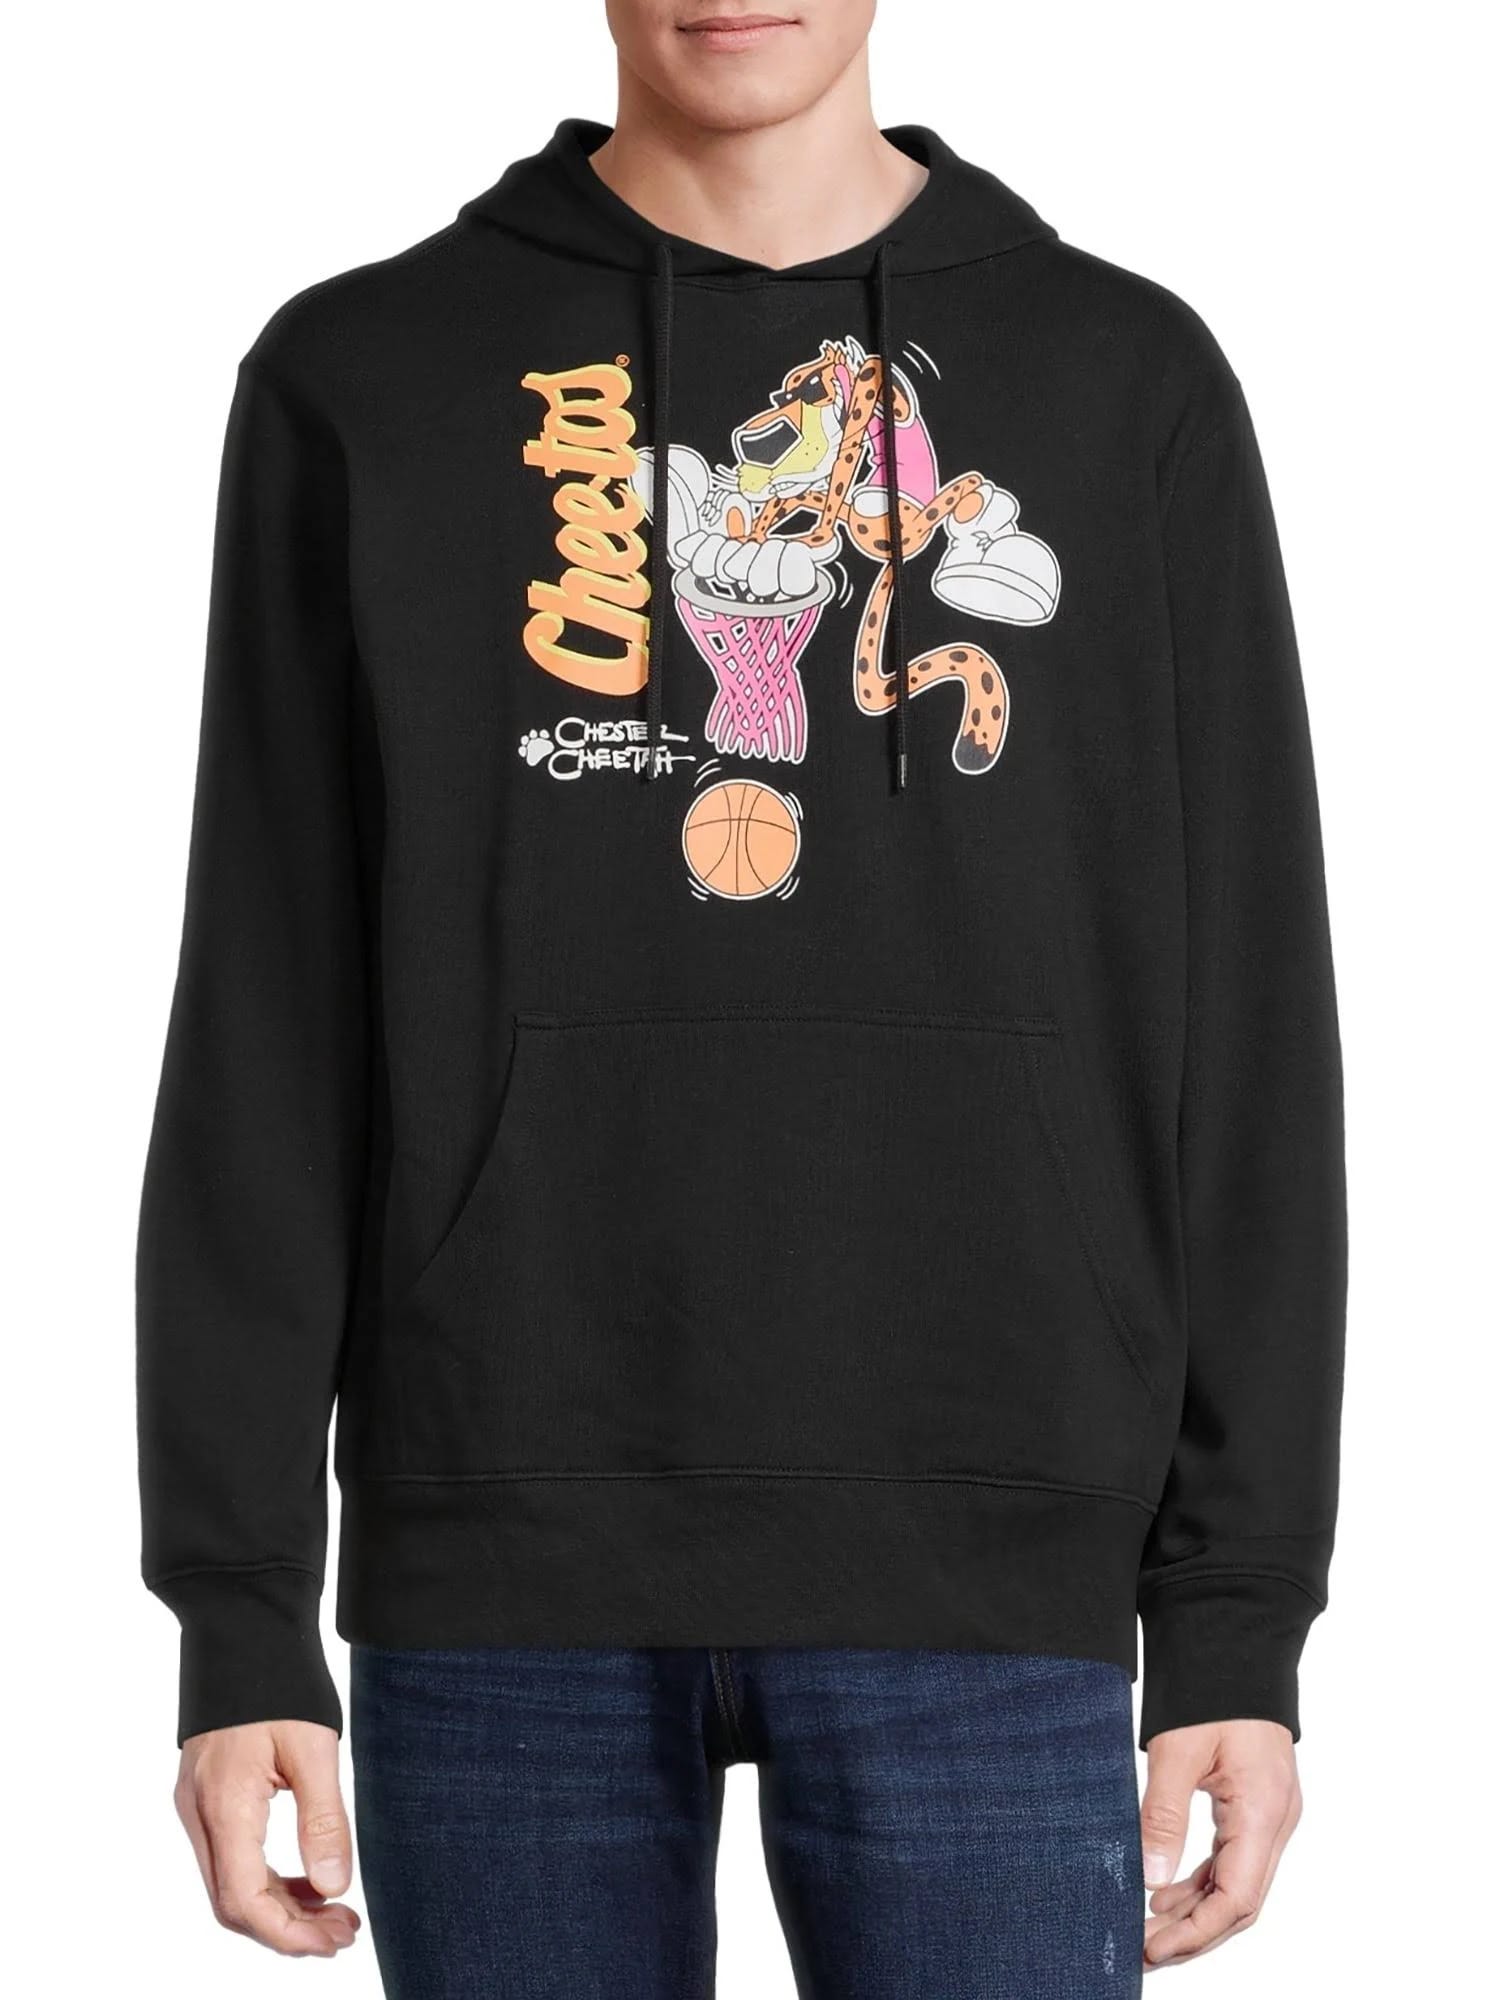 Officially Licensed Cheetos Black and Orange Graphic Hoodie | Image